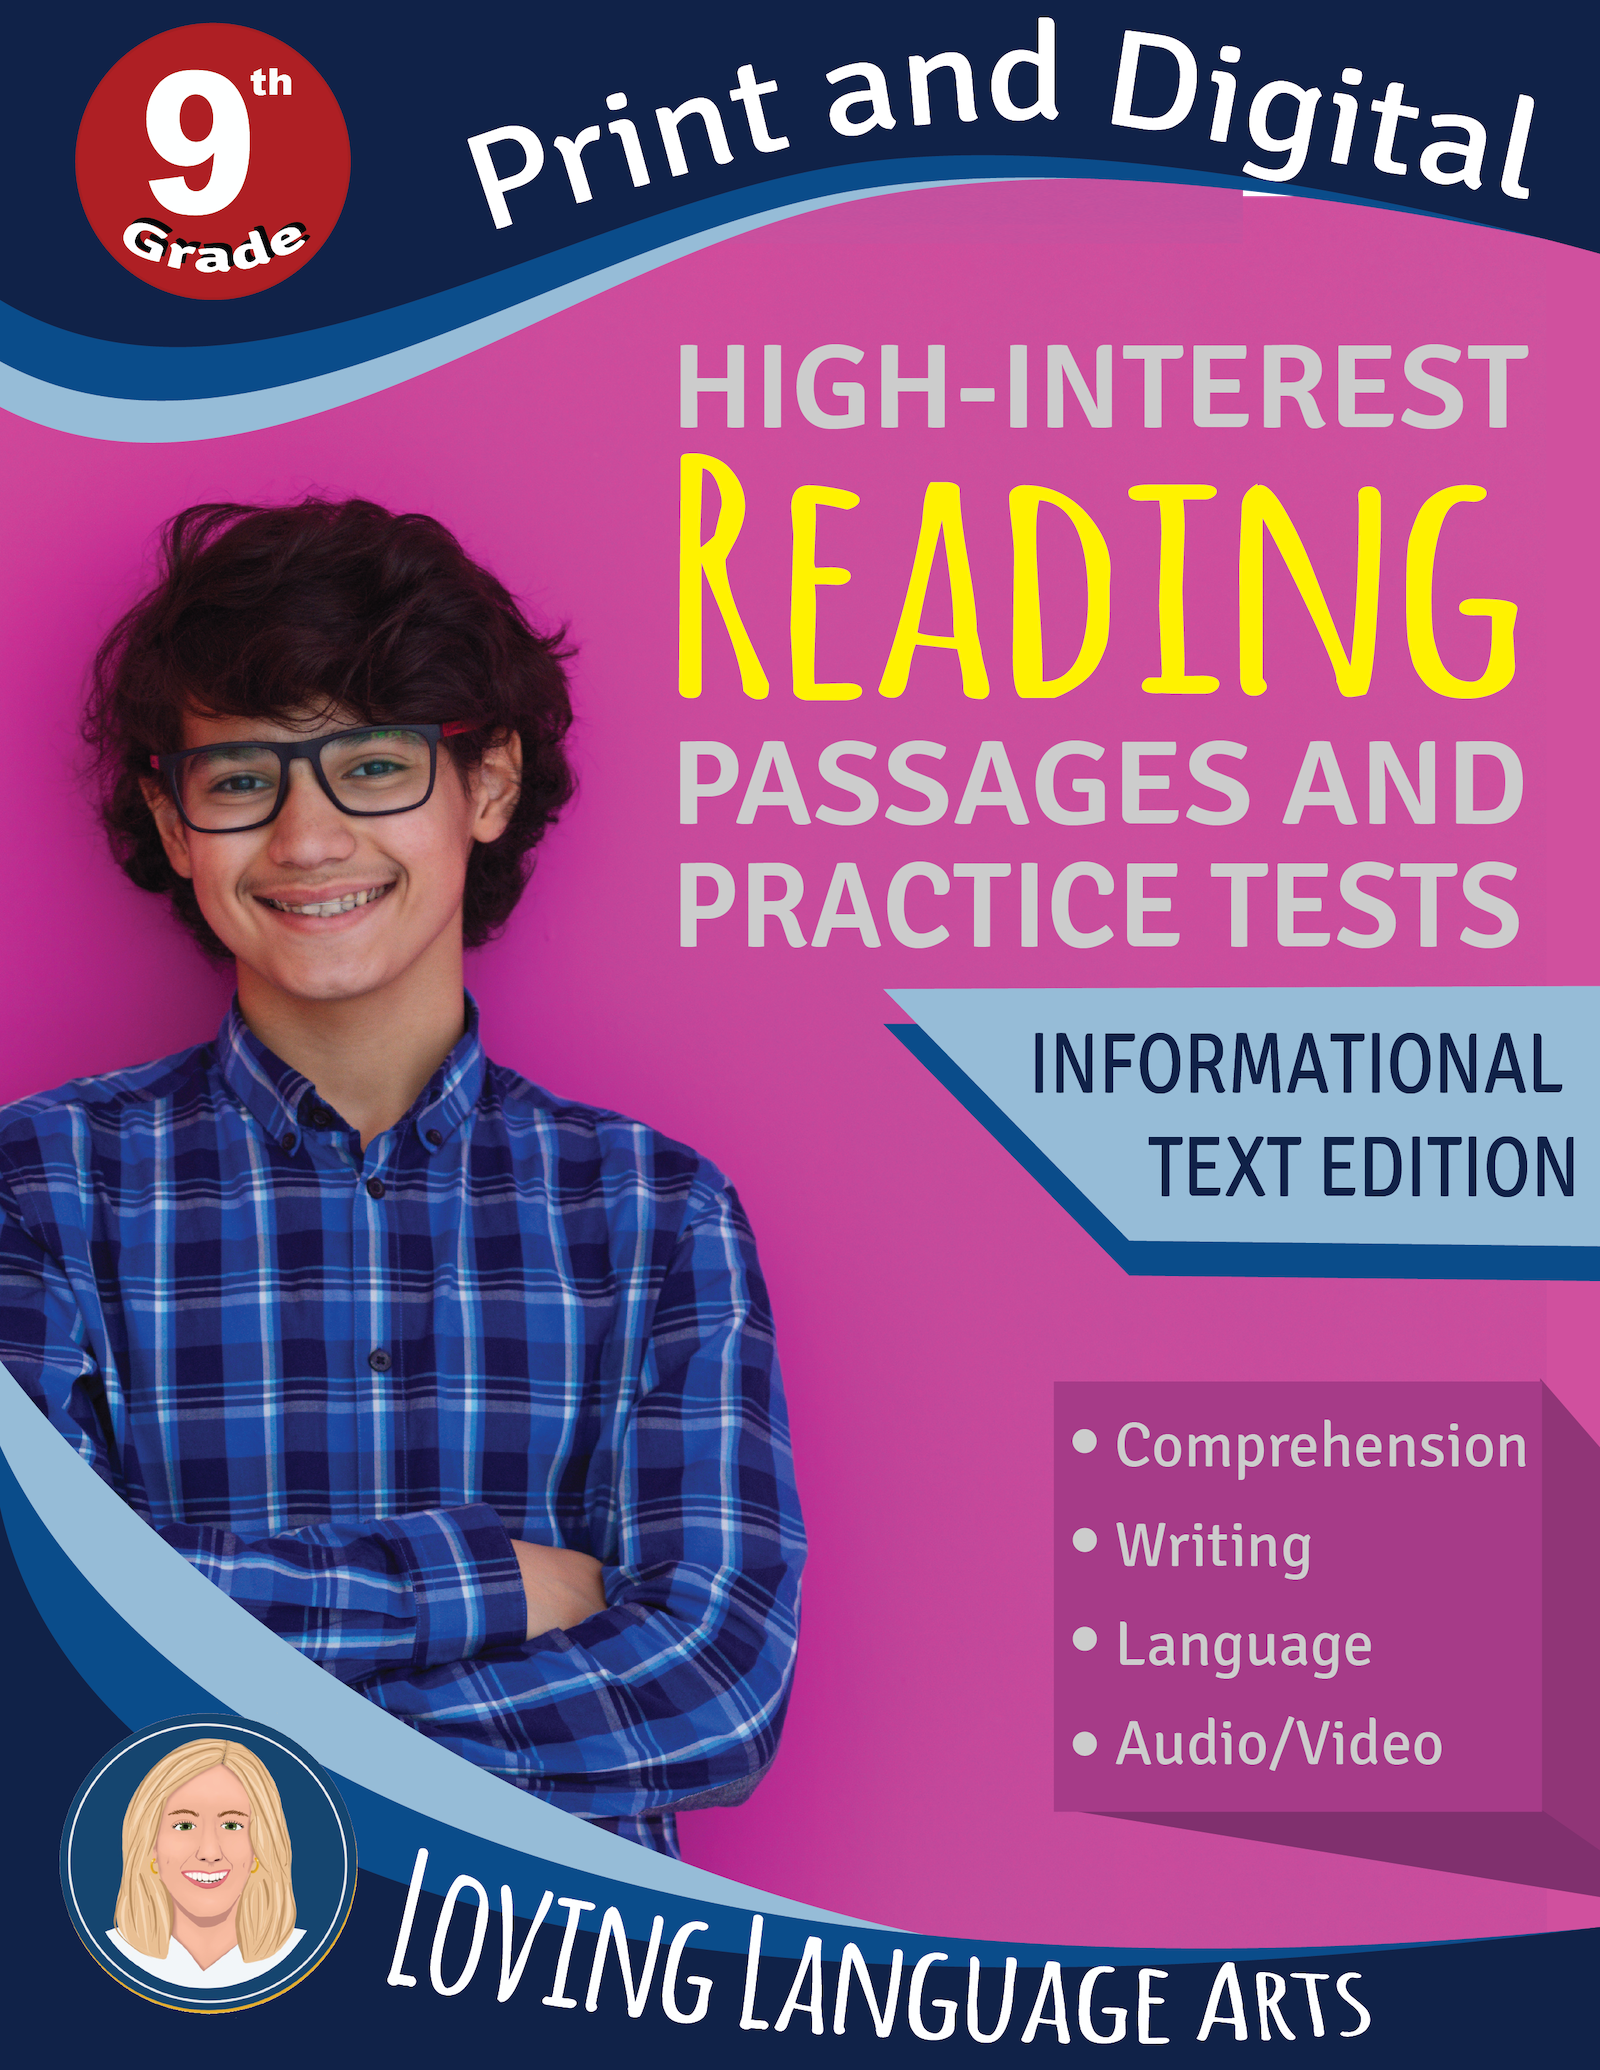 Grade 9 Reading Passages and Practice Tests Workbook - Informational Text Edition